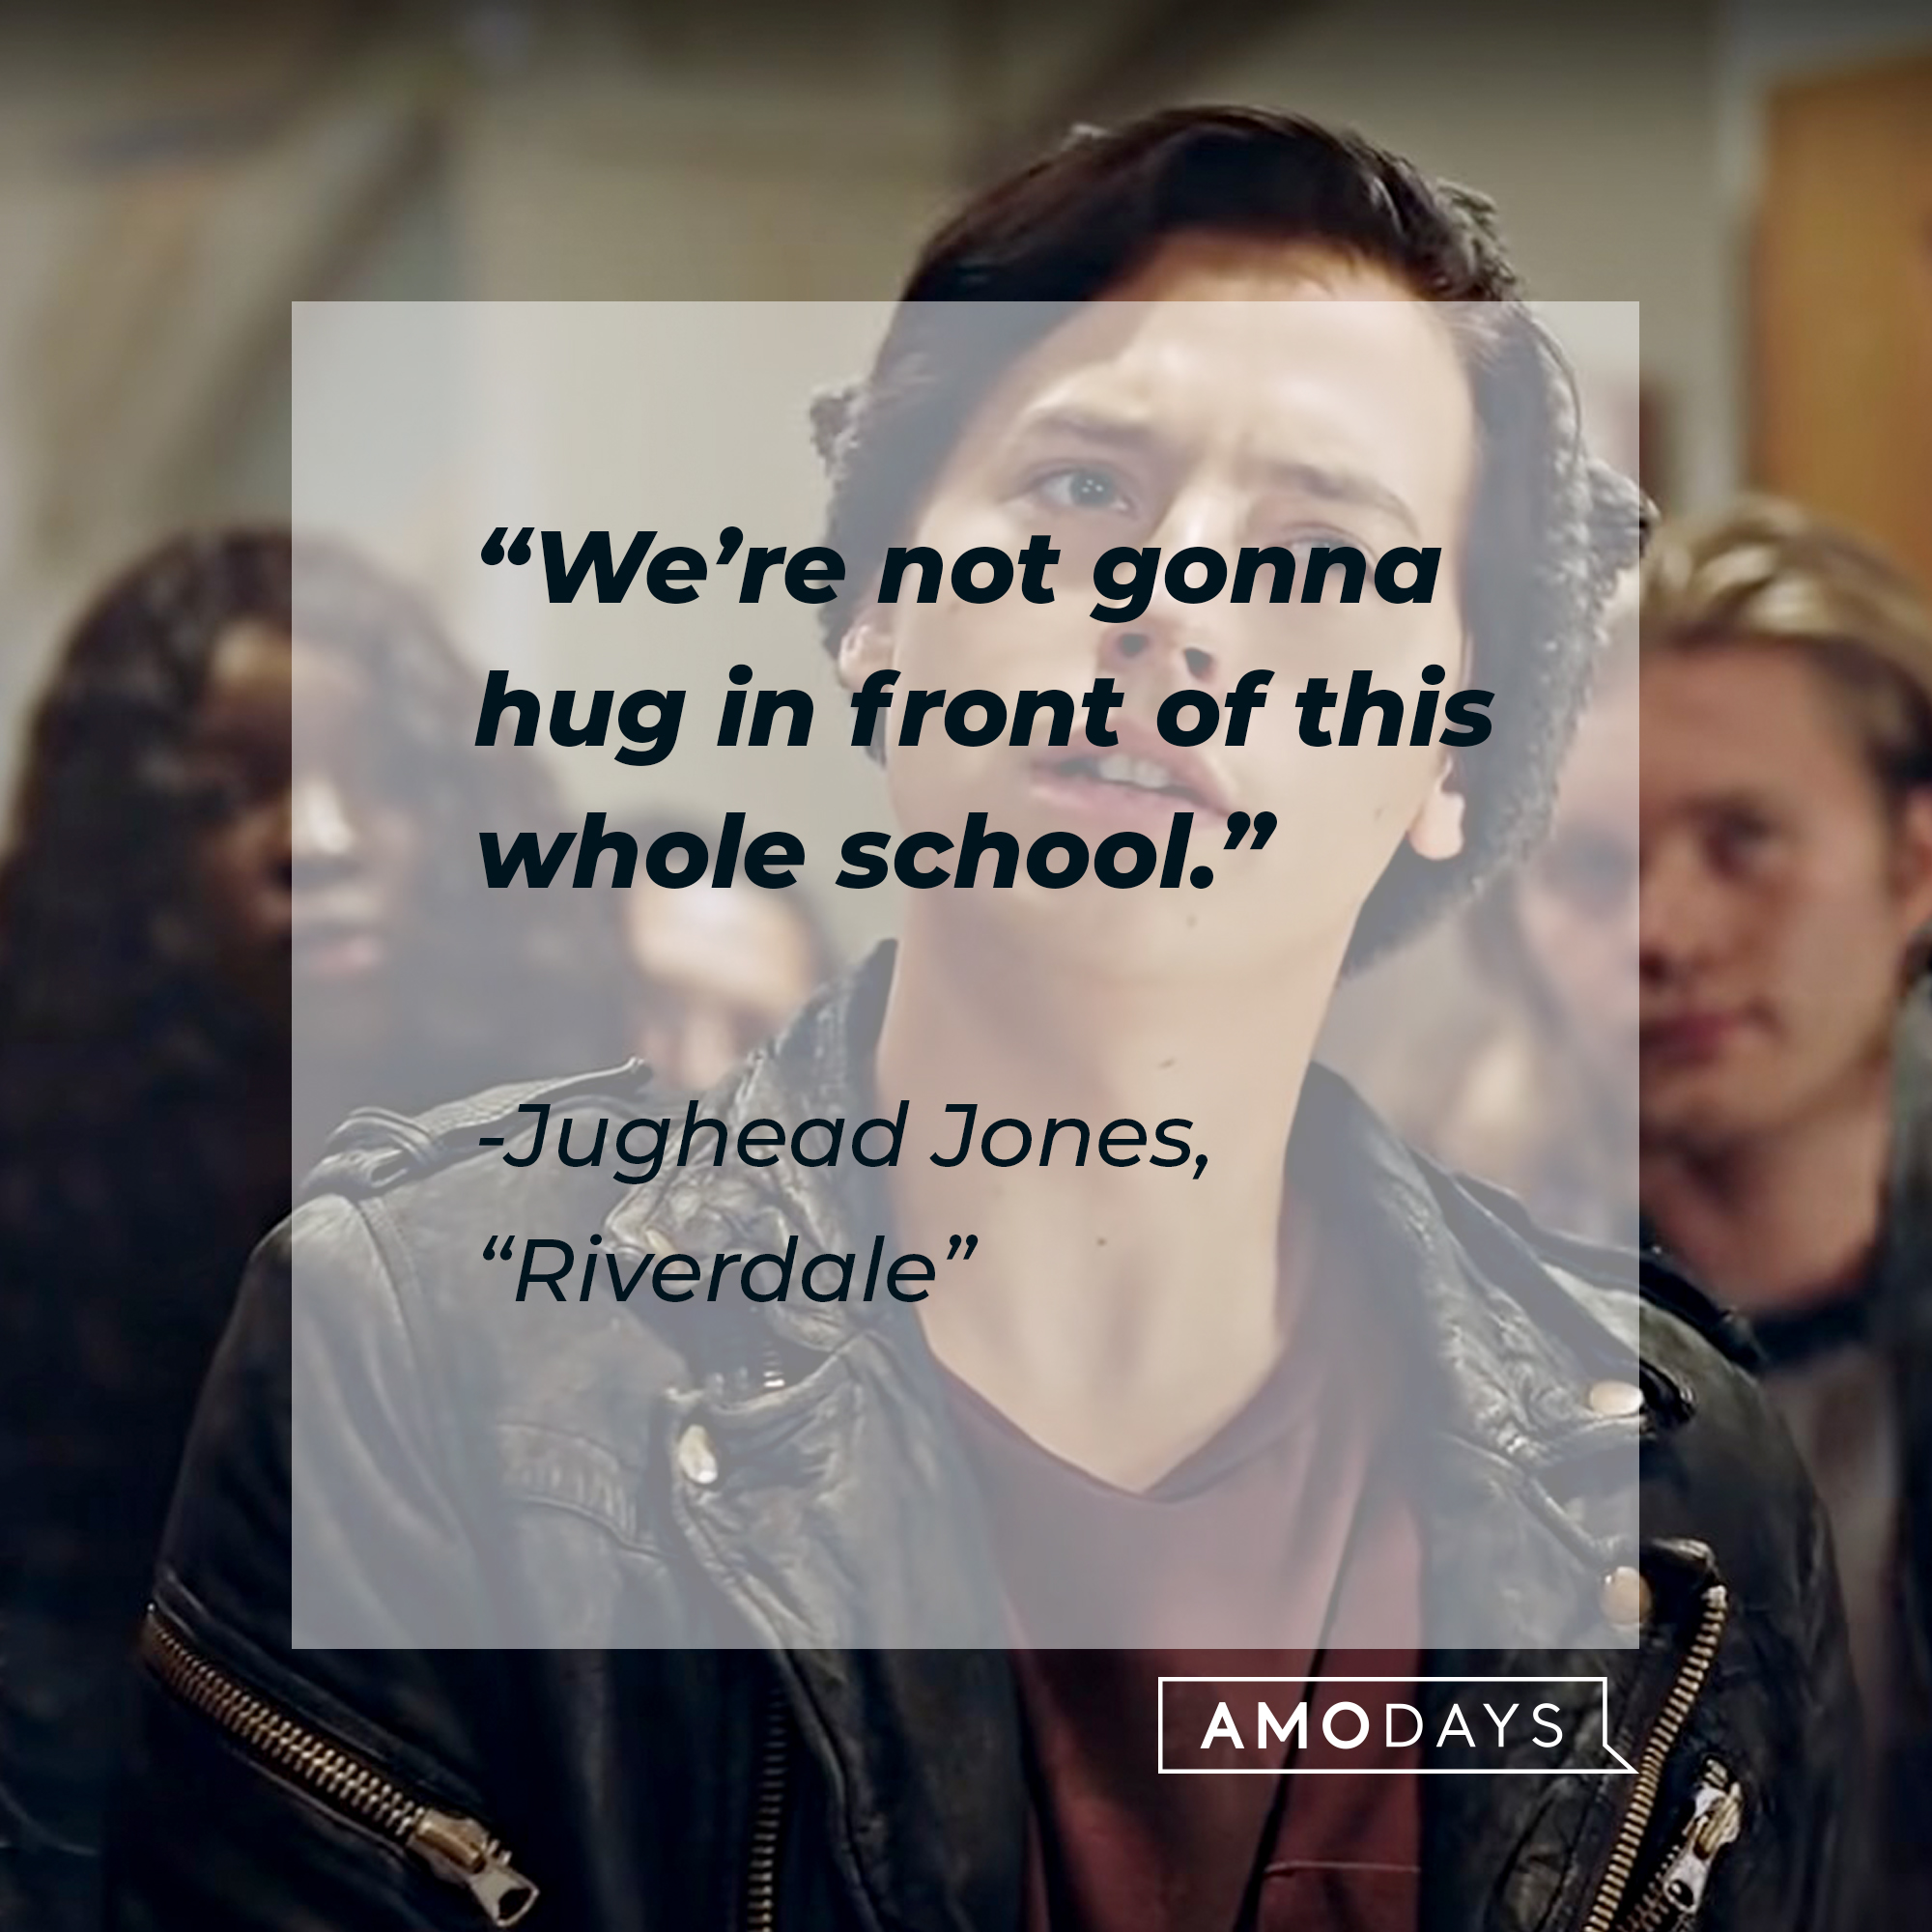 Image of Cole Sprouse as Judhead Jones in "Riverdale" with the quote: “We’re not gonna hug in front of this whole school.” | Source: facebook.com/Riverdale